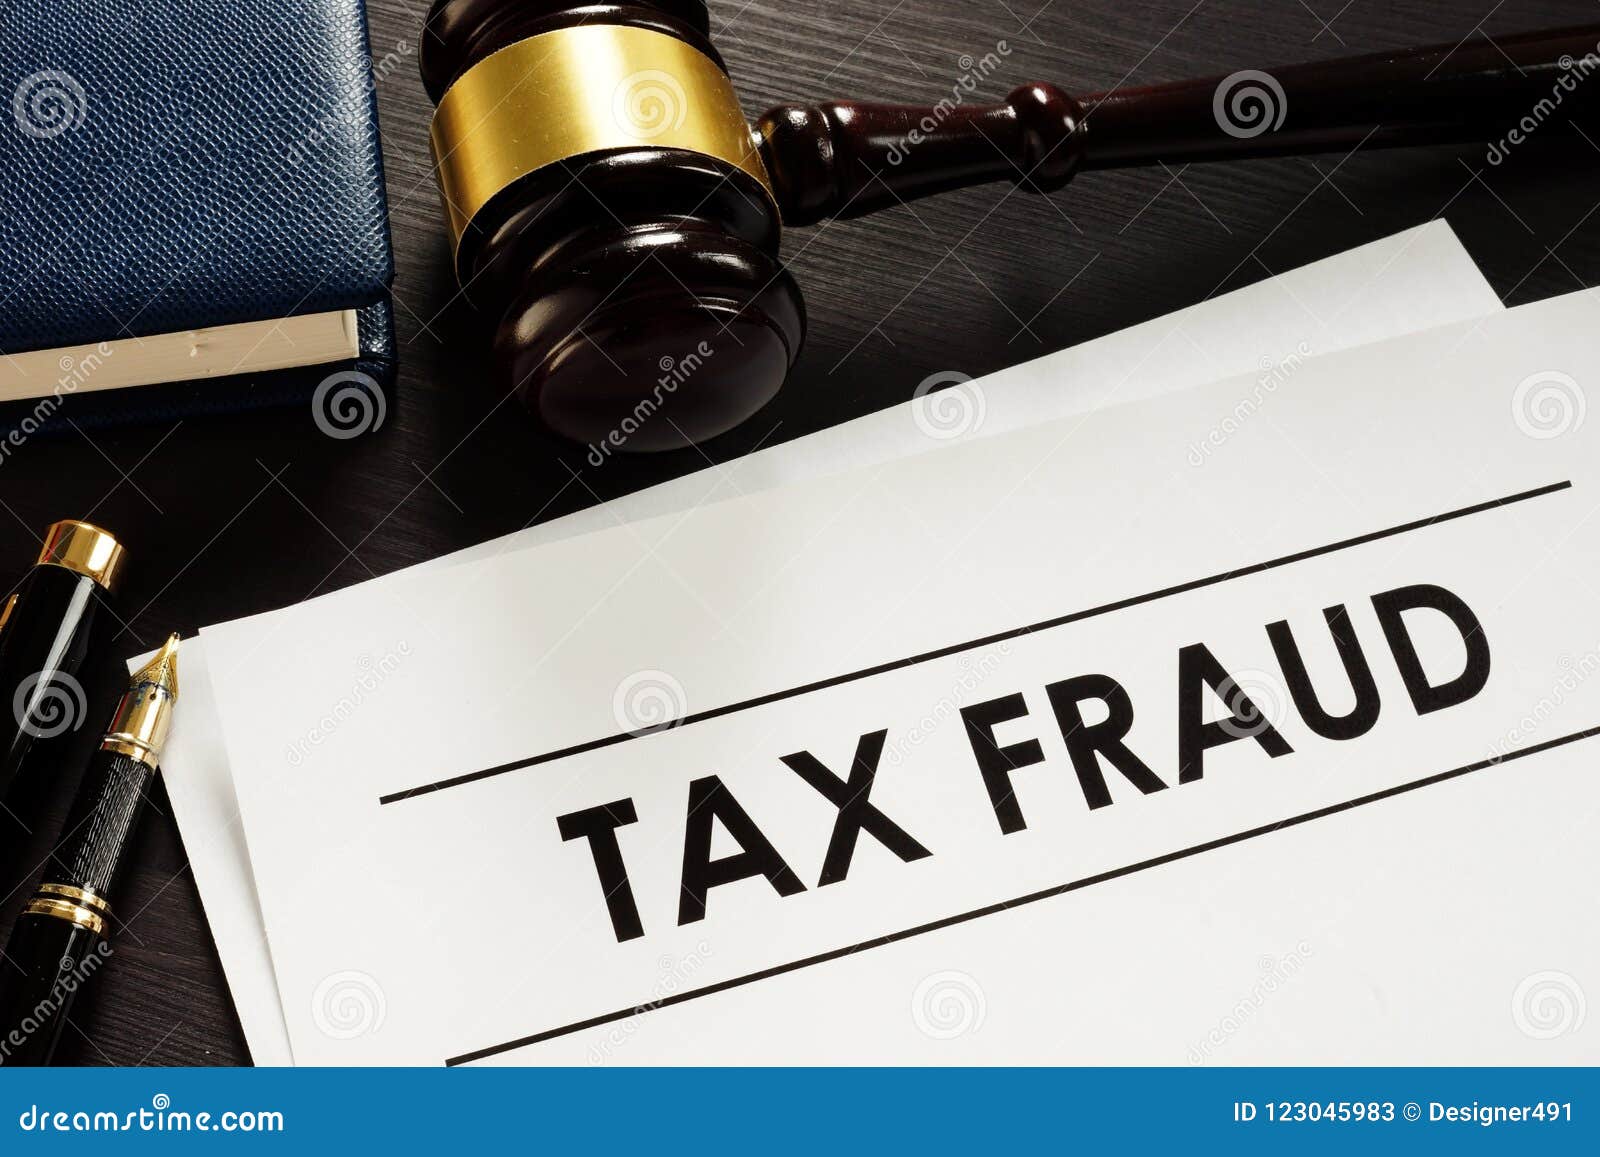 documents about tax fraud in the court.